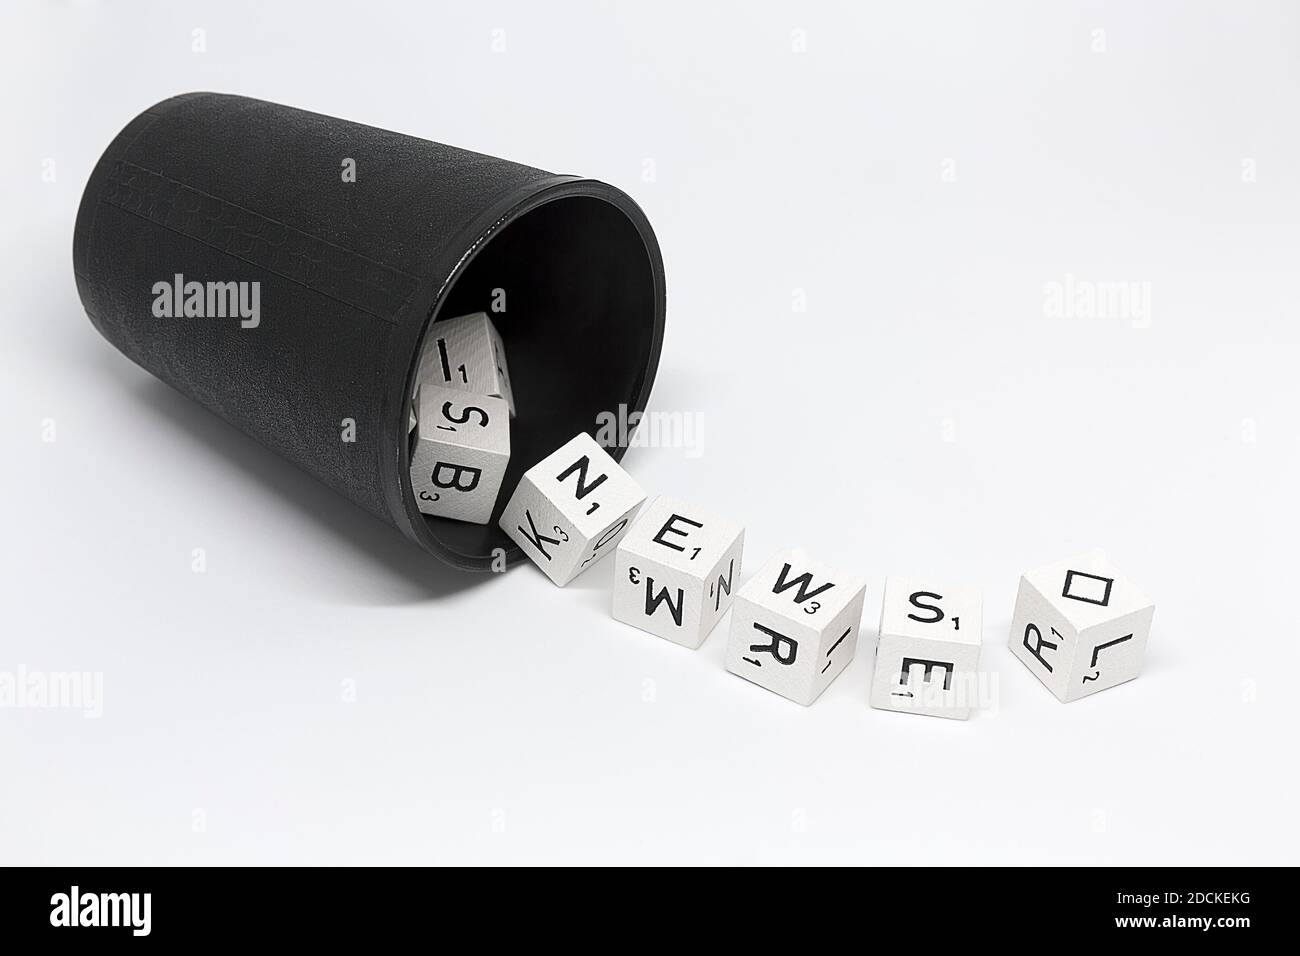 Dice cup with dice with letters and rhombus as joker, lettering News, symbolic image for news, news, Germany Stock Photo